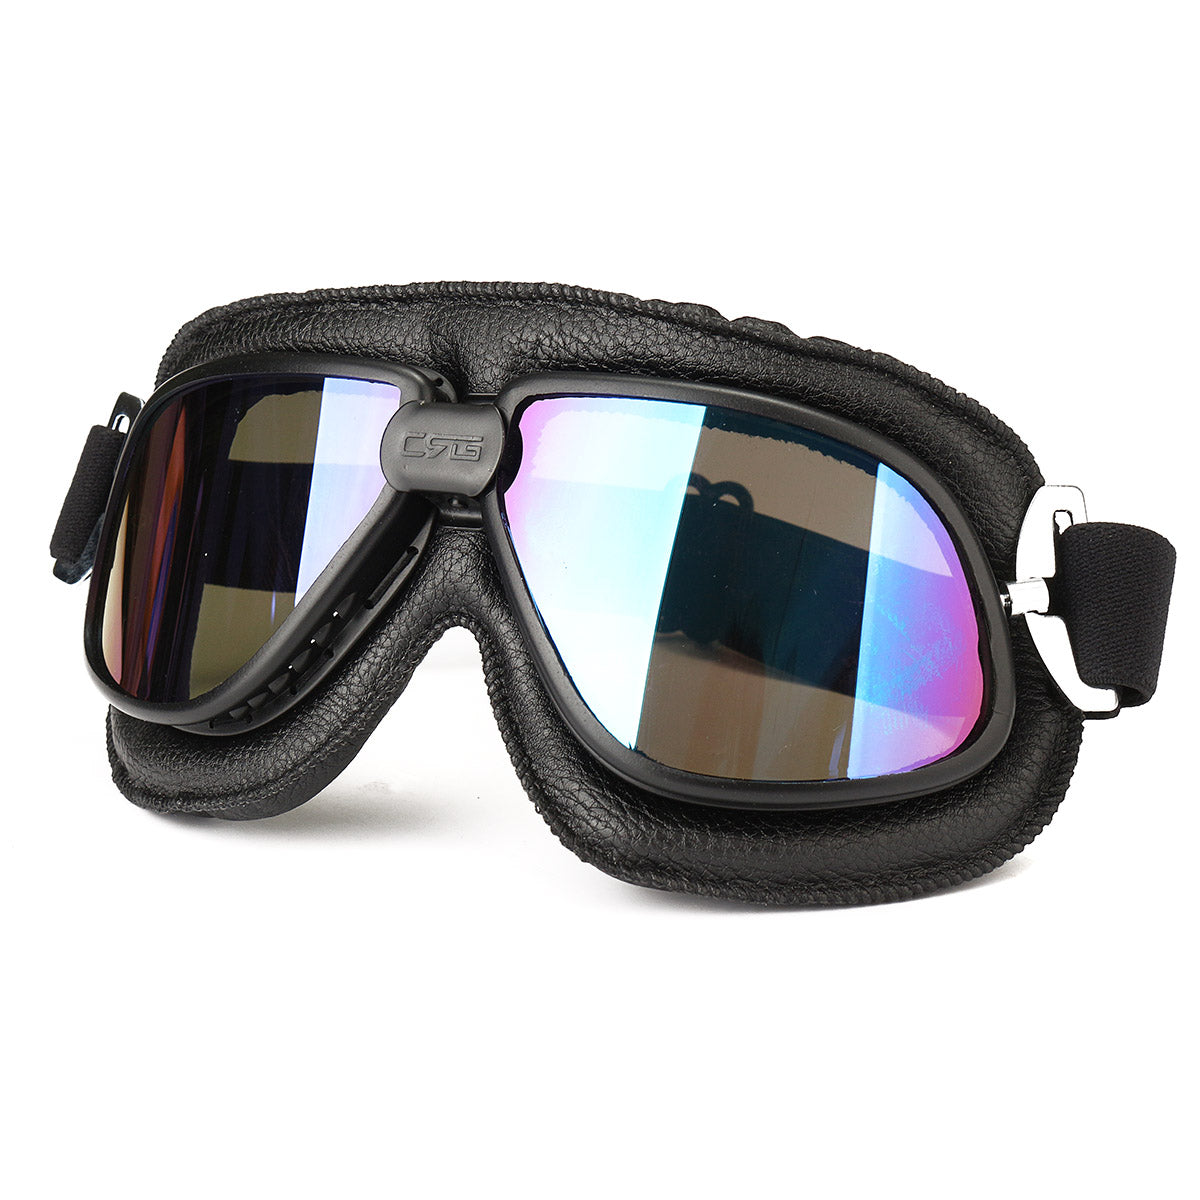 Black Motorcycle Goggles Scooter Helmet Leather Anti UV Fog Protector Glasses